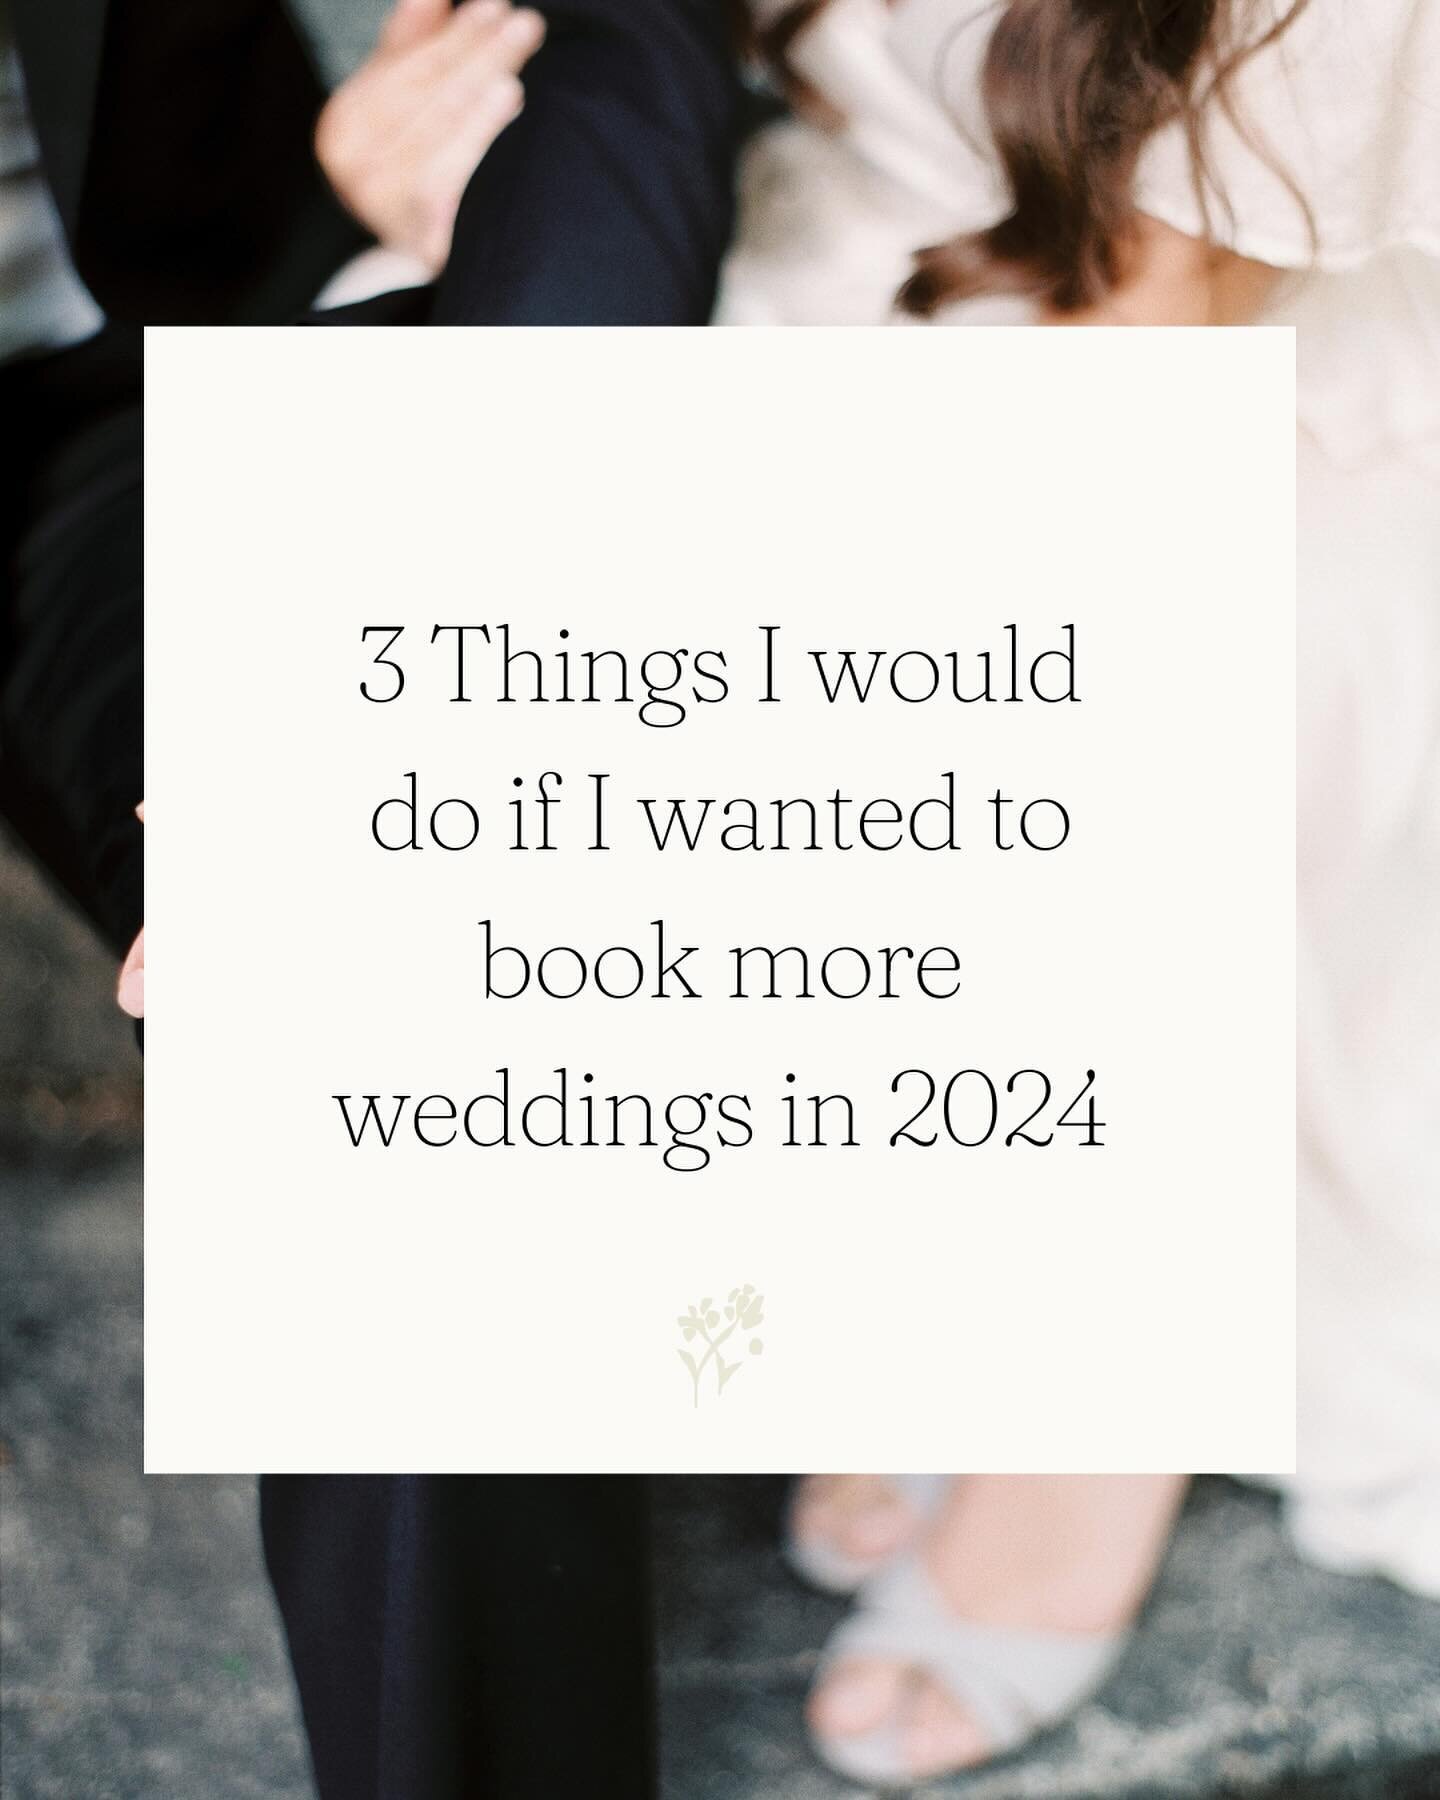 Engagements are down. Bookings are down.⁠
⁠
Simple math: No one was having meet cutes a few years ago, so there&rsquo;s fewer couples tying the knot right now. ⁠
⁠
The wedding boom has been followed by the engagement gap, and I&rsquo;m sorry to say, 